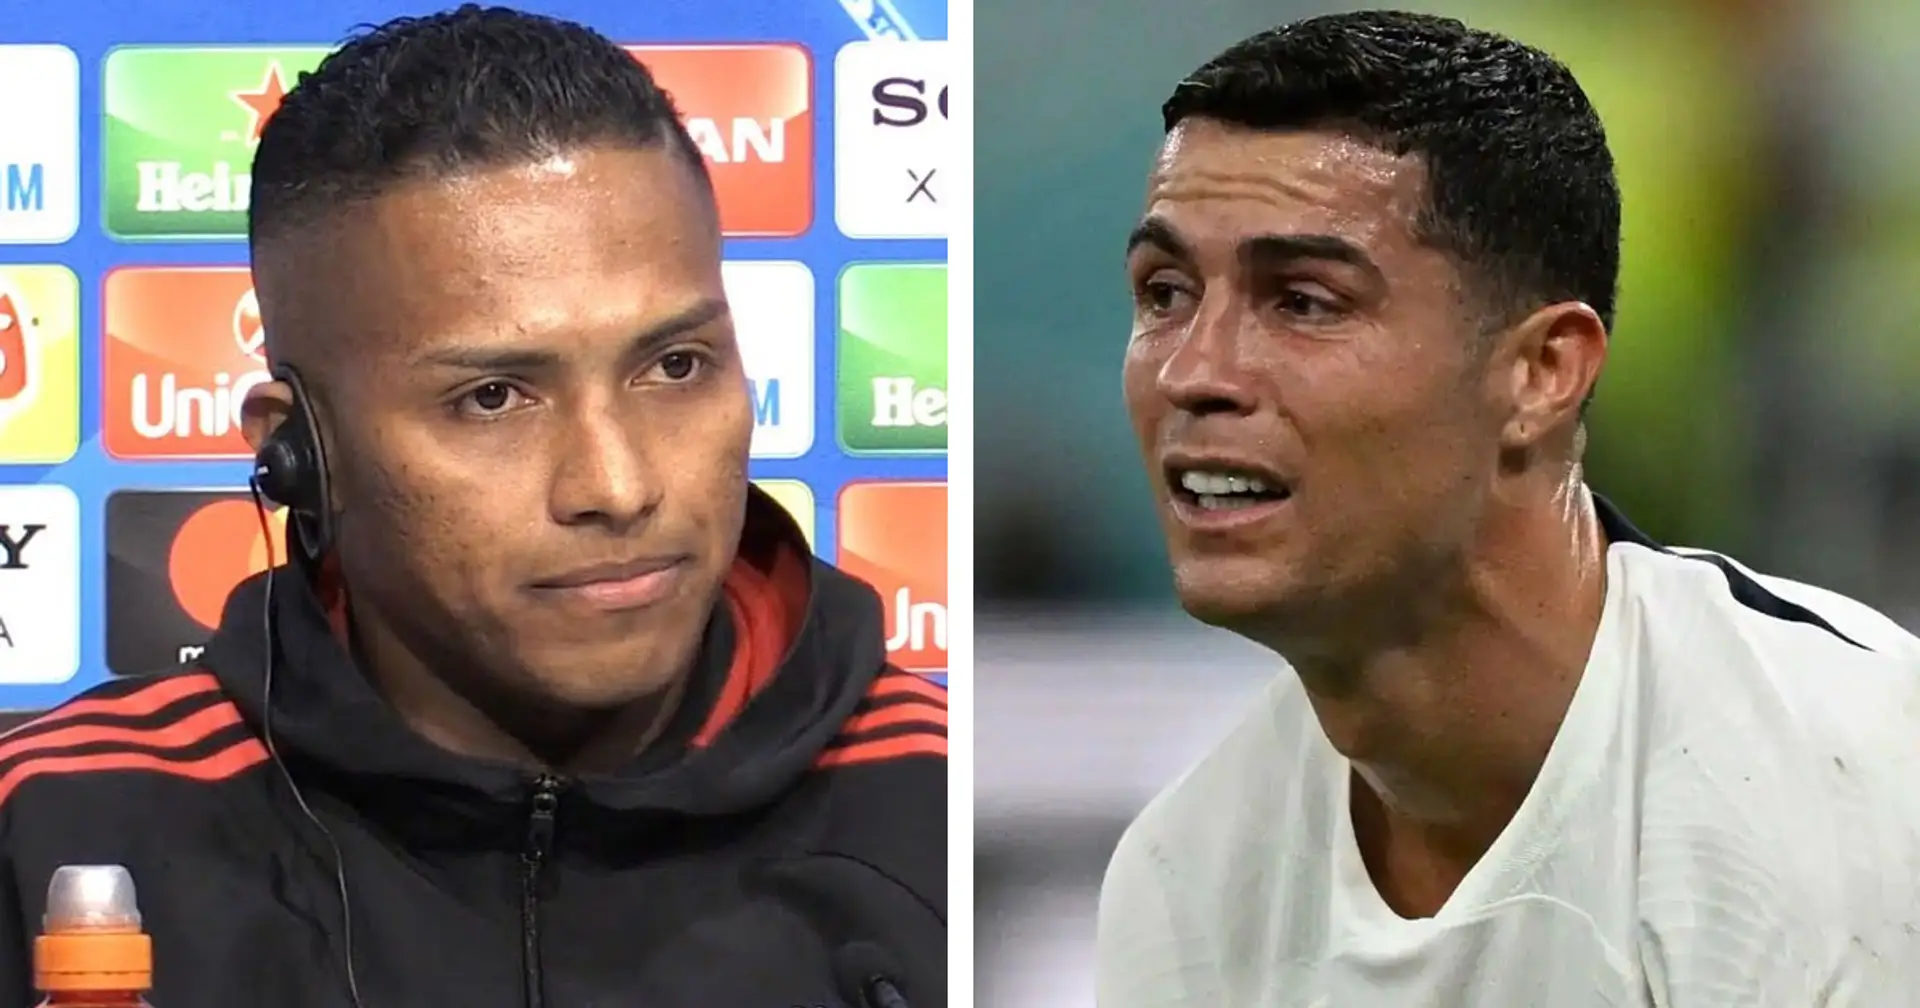 'It's too bad Cristiano left in the way he did': Antonio Valencia explains how Ronaldo should’ve left Man United